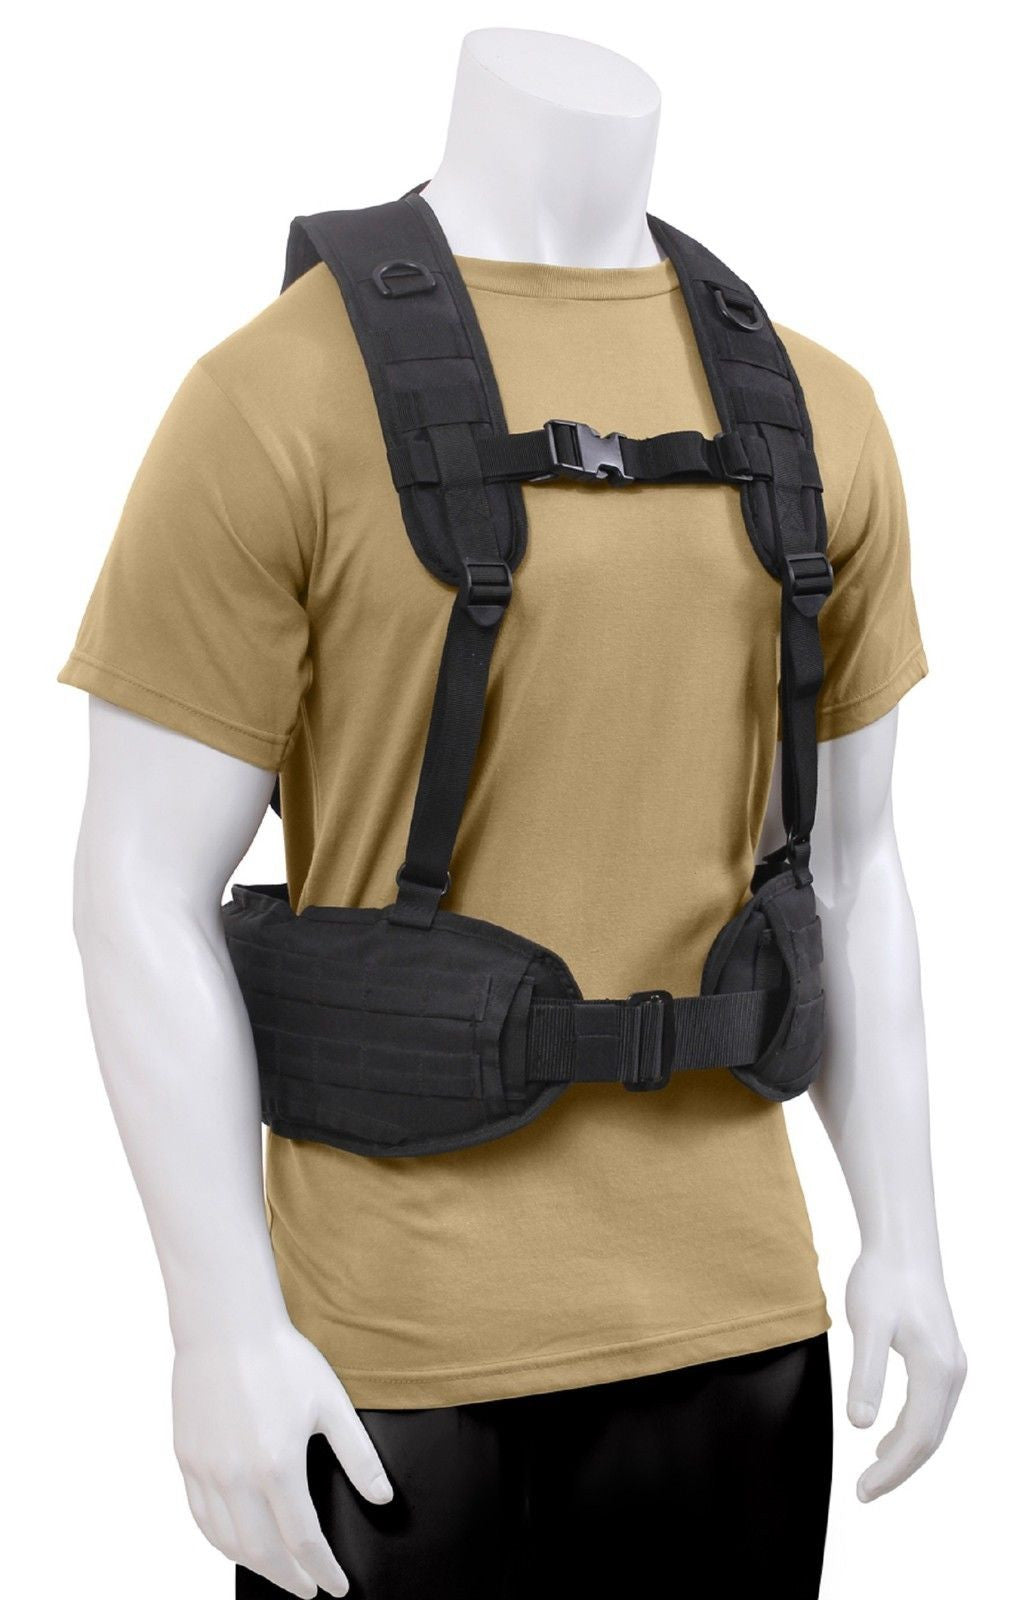 Black or Coyote Brown Tactical Harness - Rothco MOLLE Equipment Rig 1106